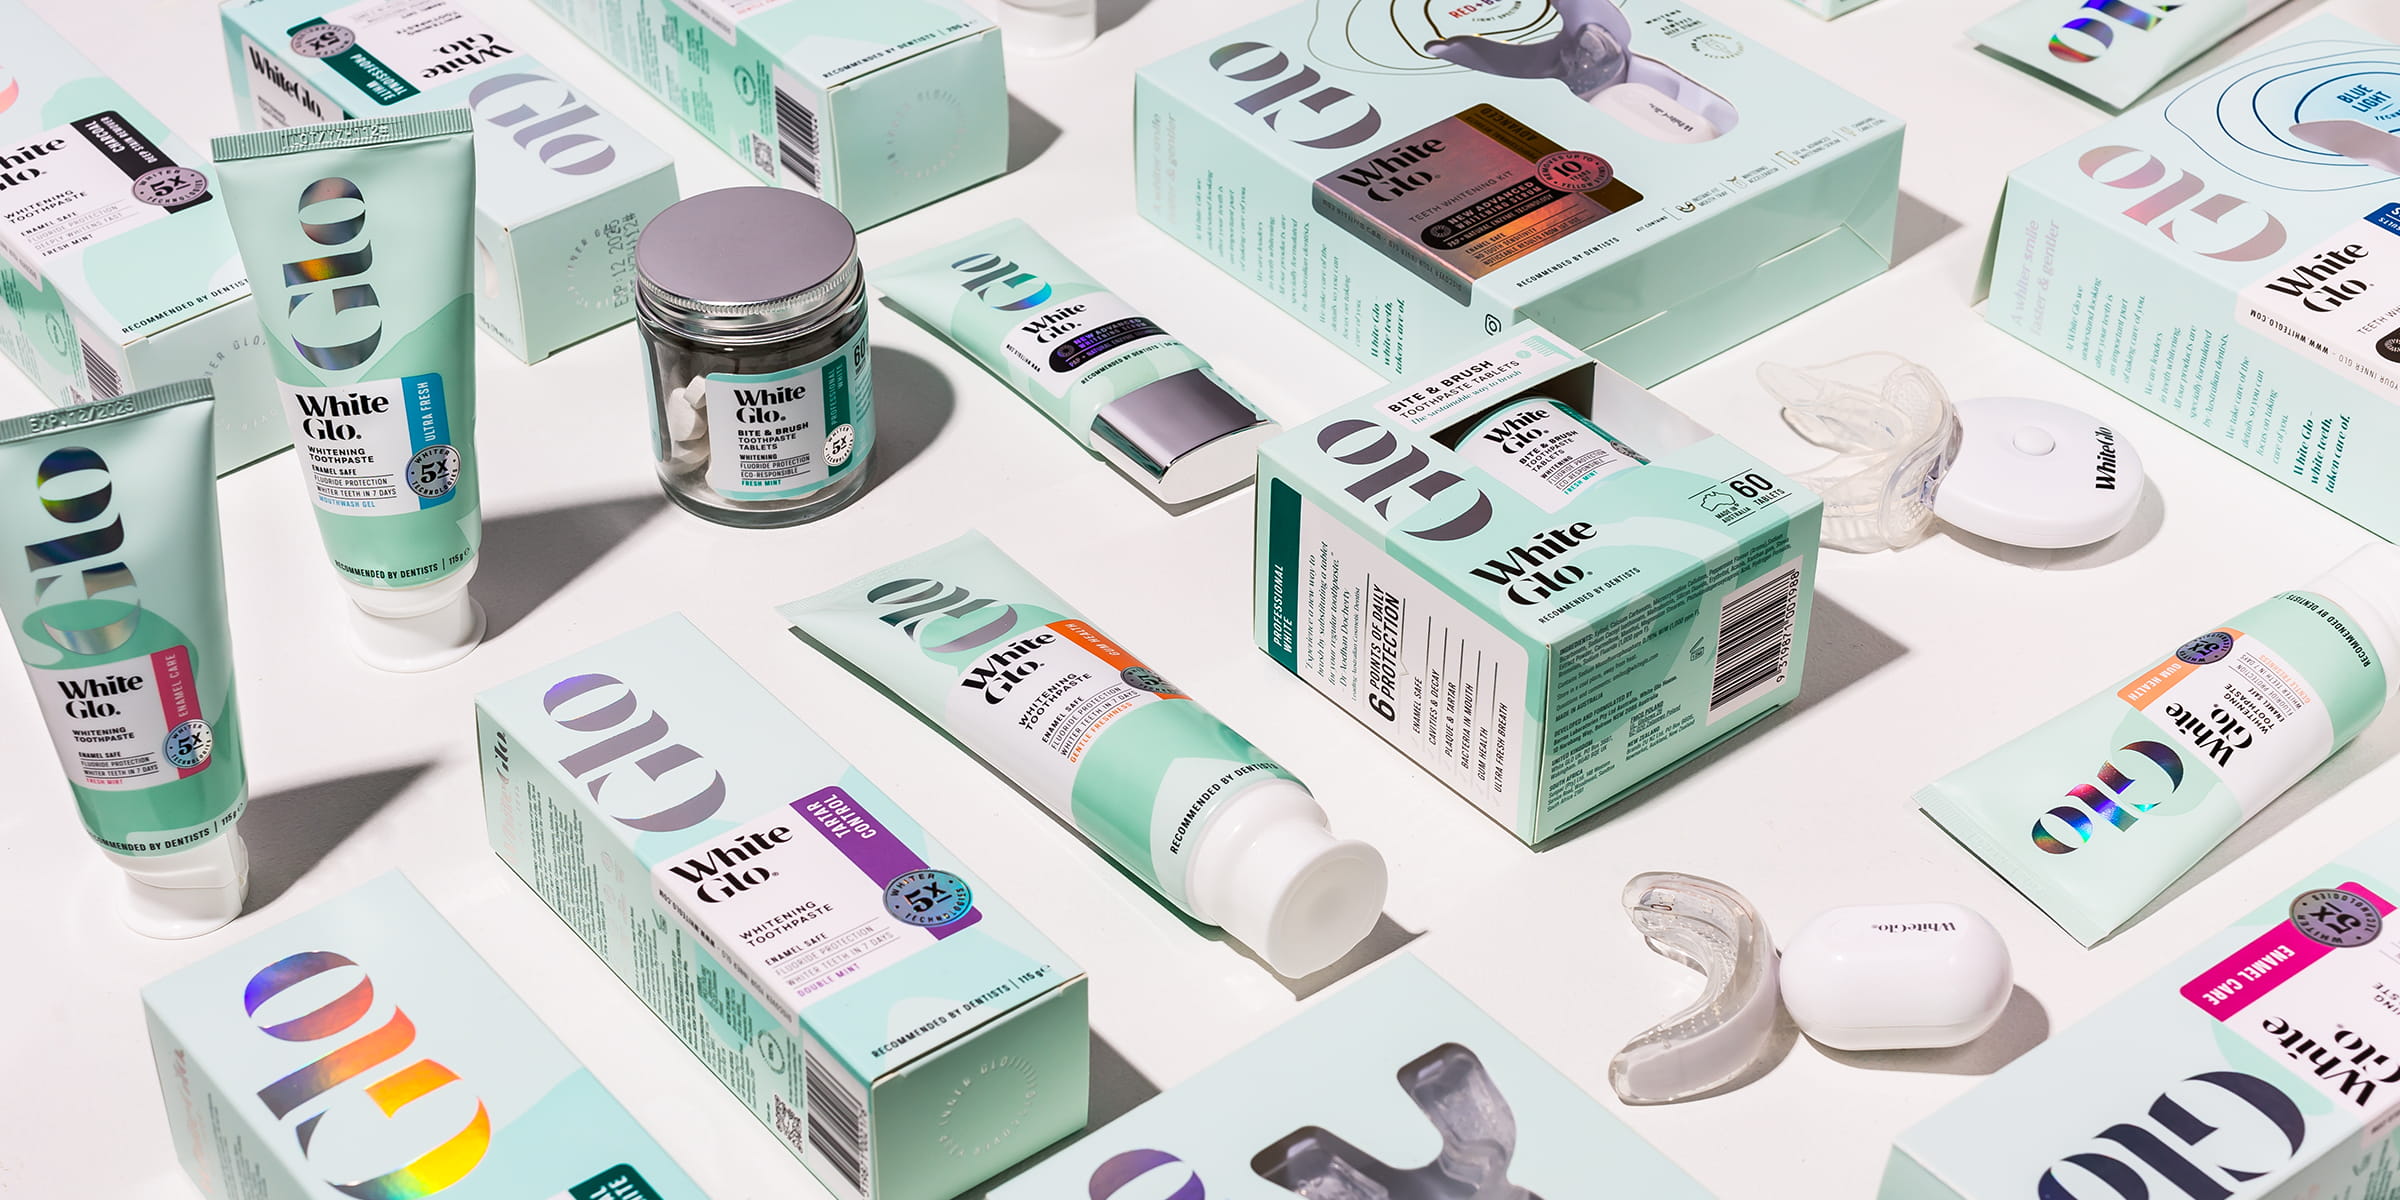 rnage-packaging-redesign-branding-holographic-bright-clean-mint-fresh-boxer-and-co